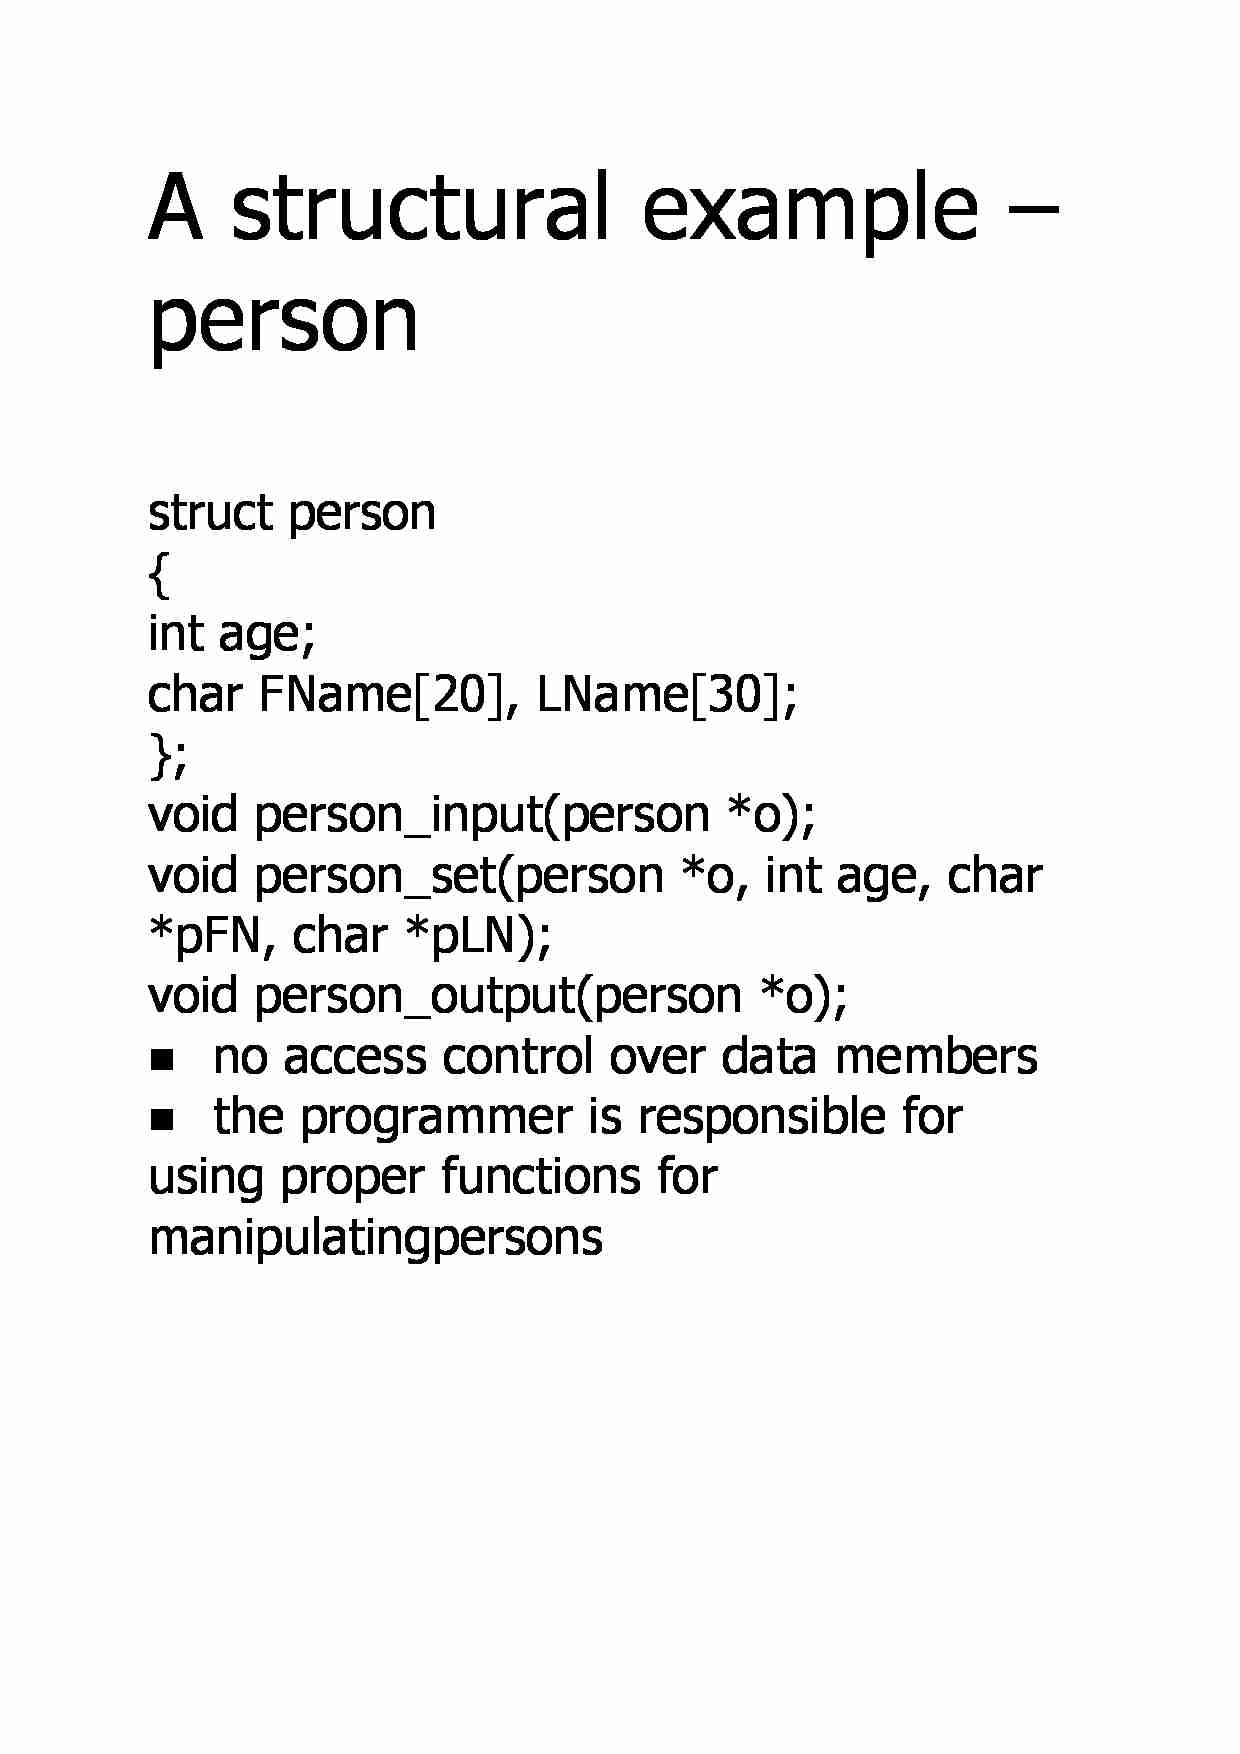 A structural example _ person - strona 1